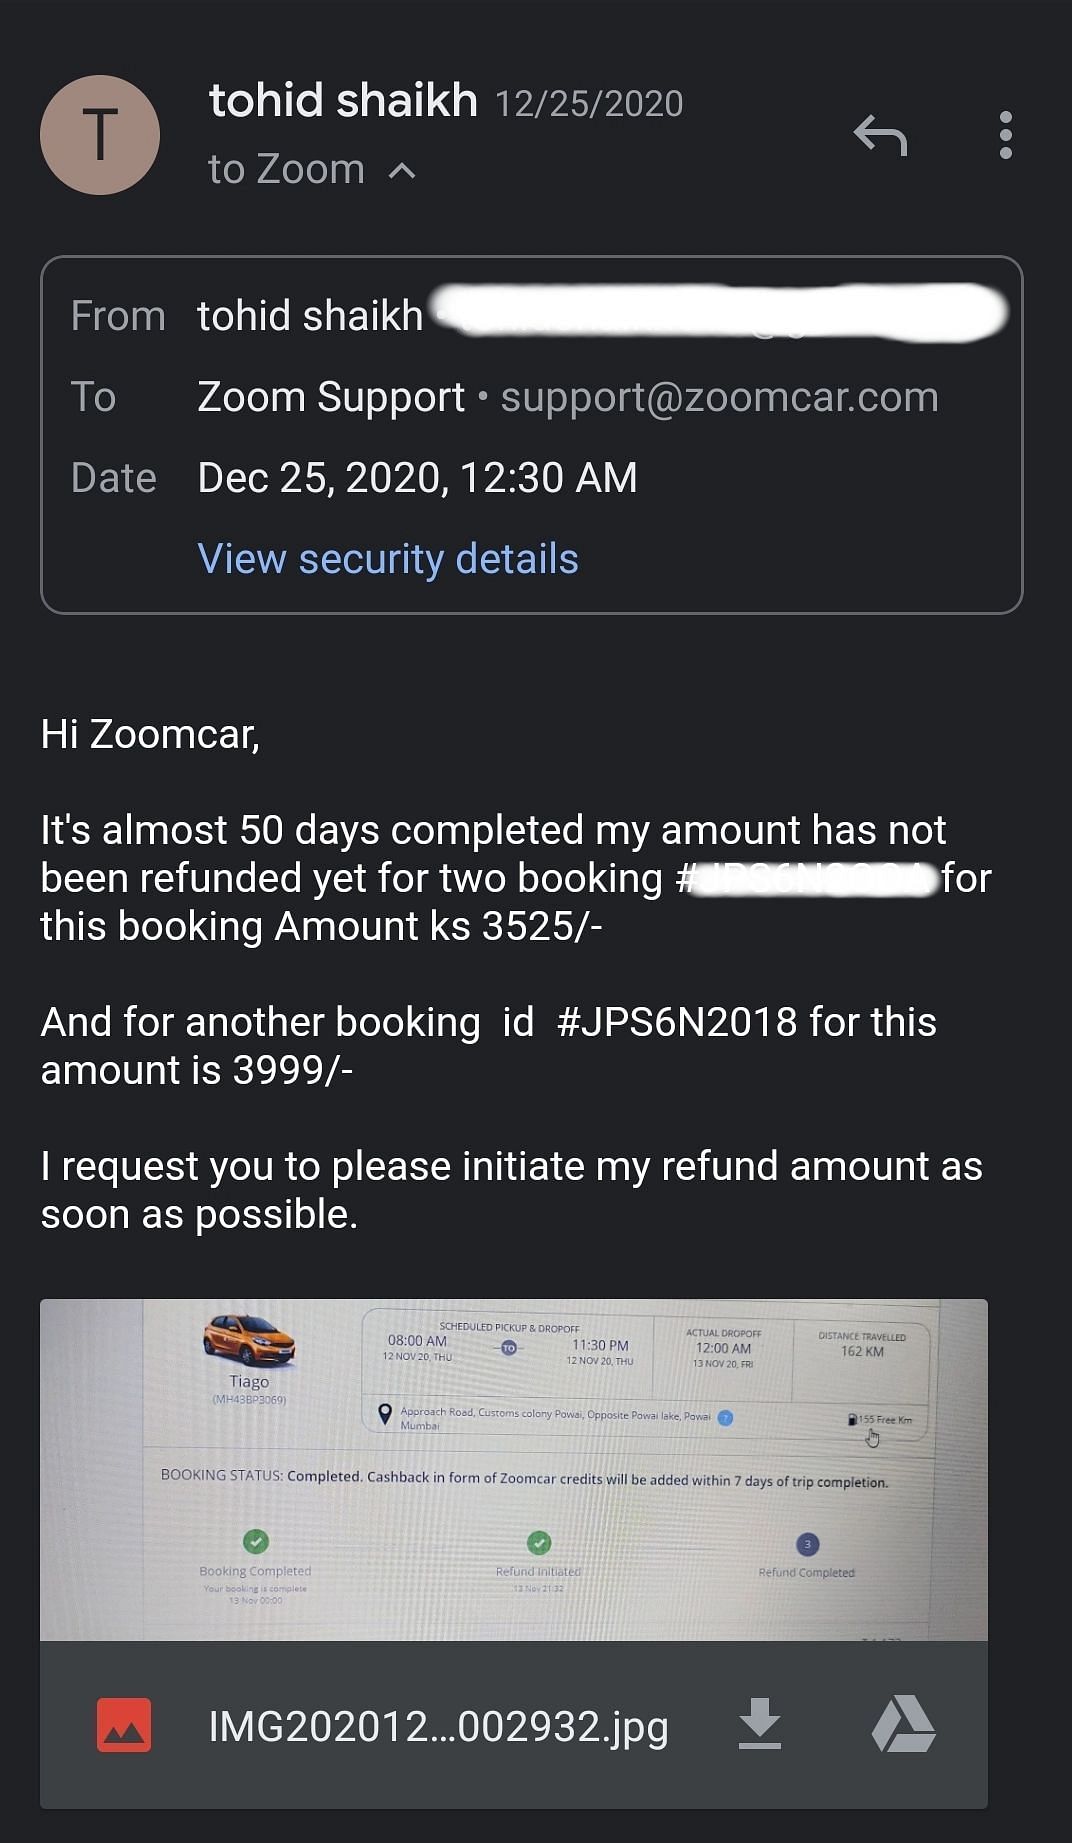 Tohid Shaikh, from Mumbai, has been trying to get a refund on the deposit made to Zoomcar since December 2020.